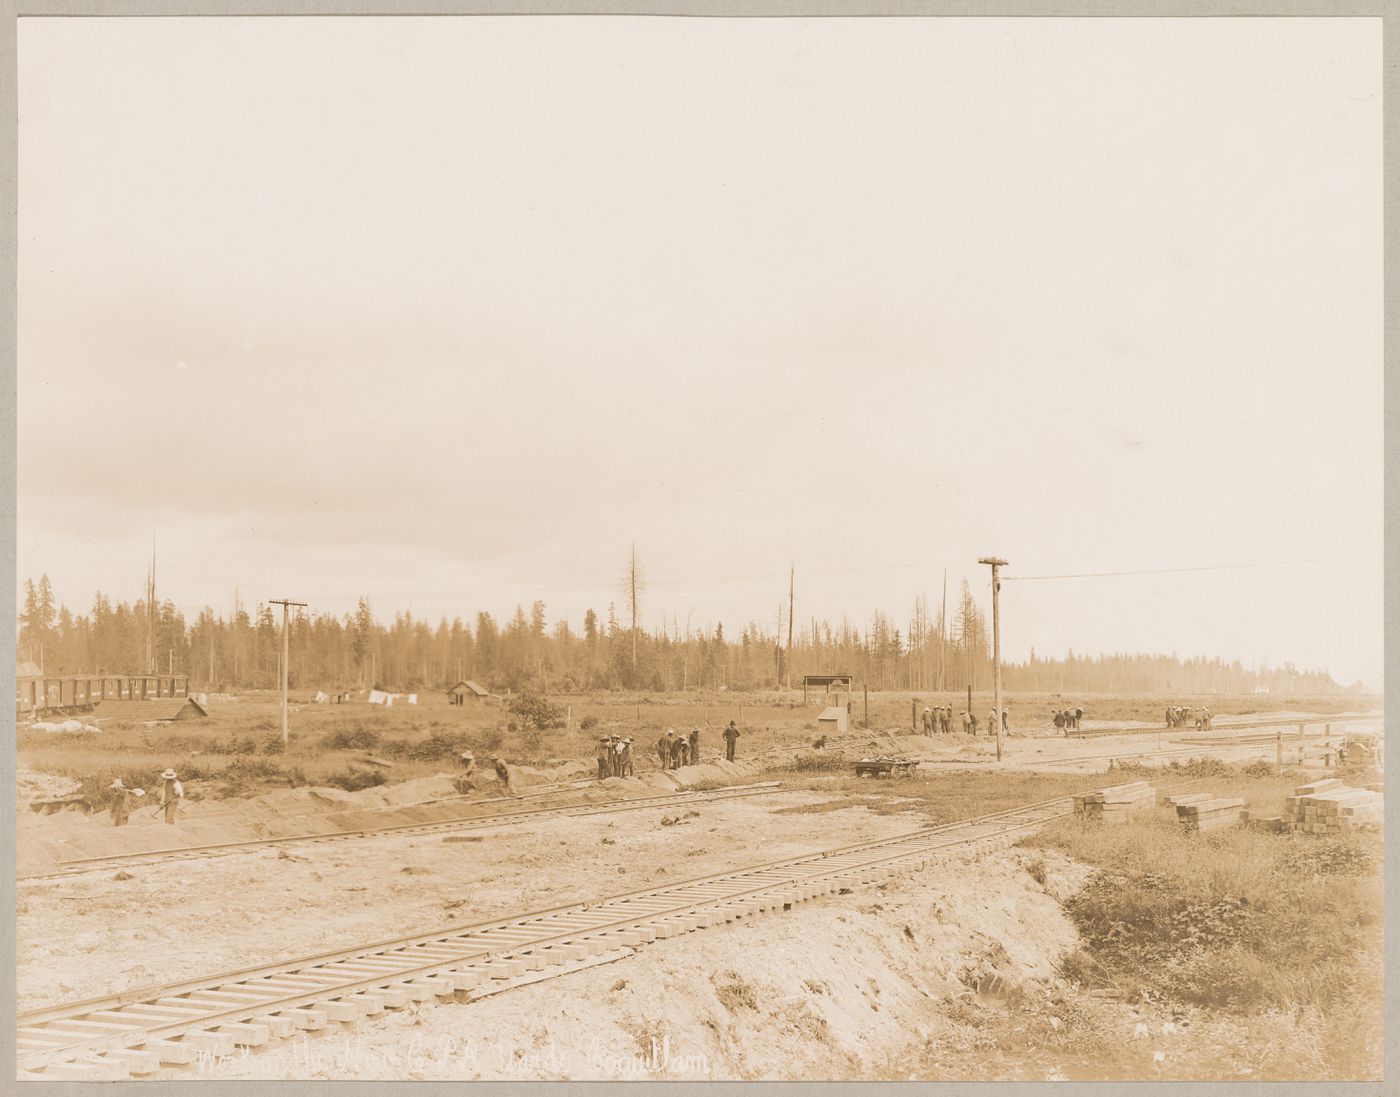 View of the Canadian Pacific Railroad Company freight yards under construction showing workers and train, Coquitlam (now Port Coquitlam), British Columbia